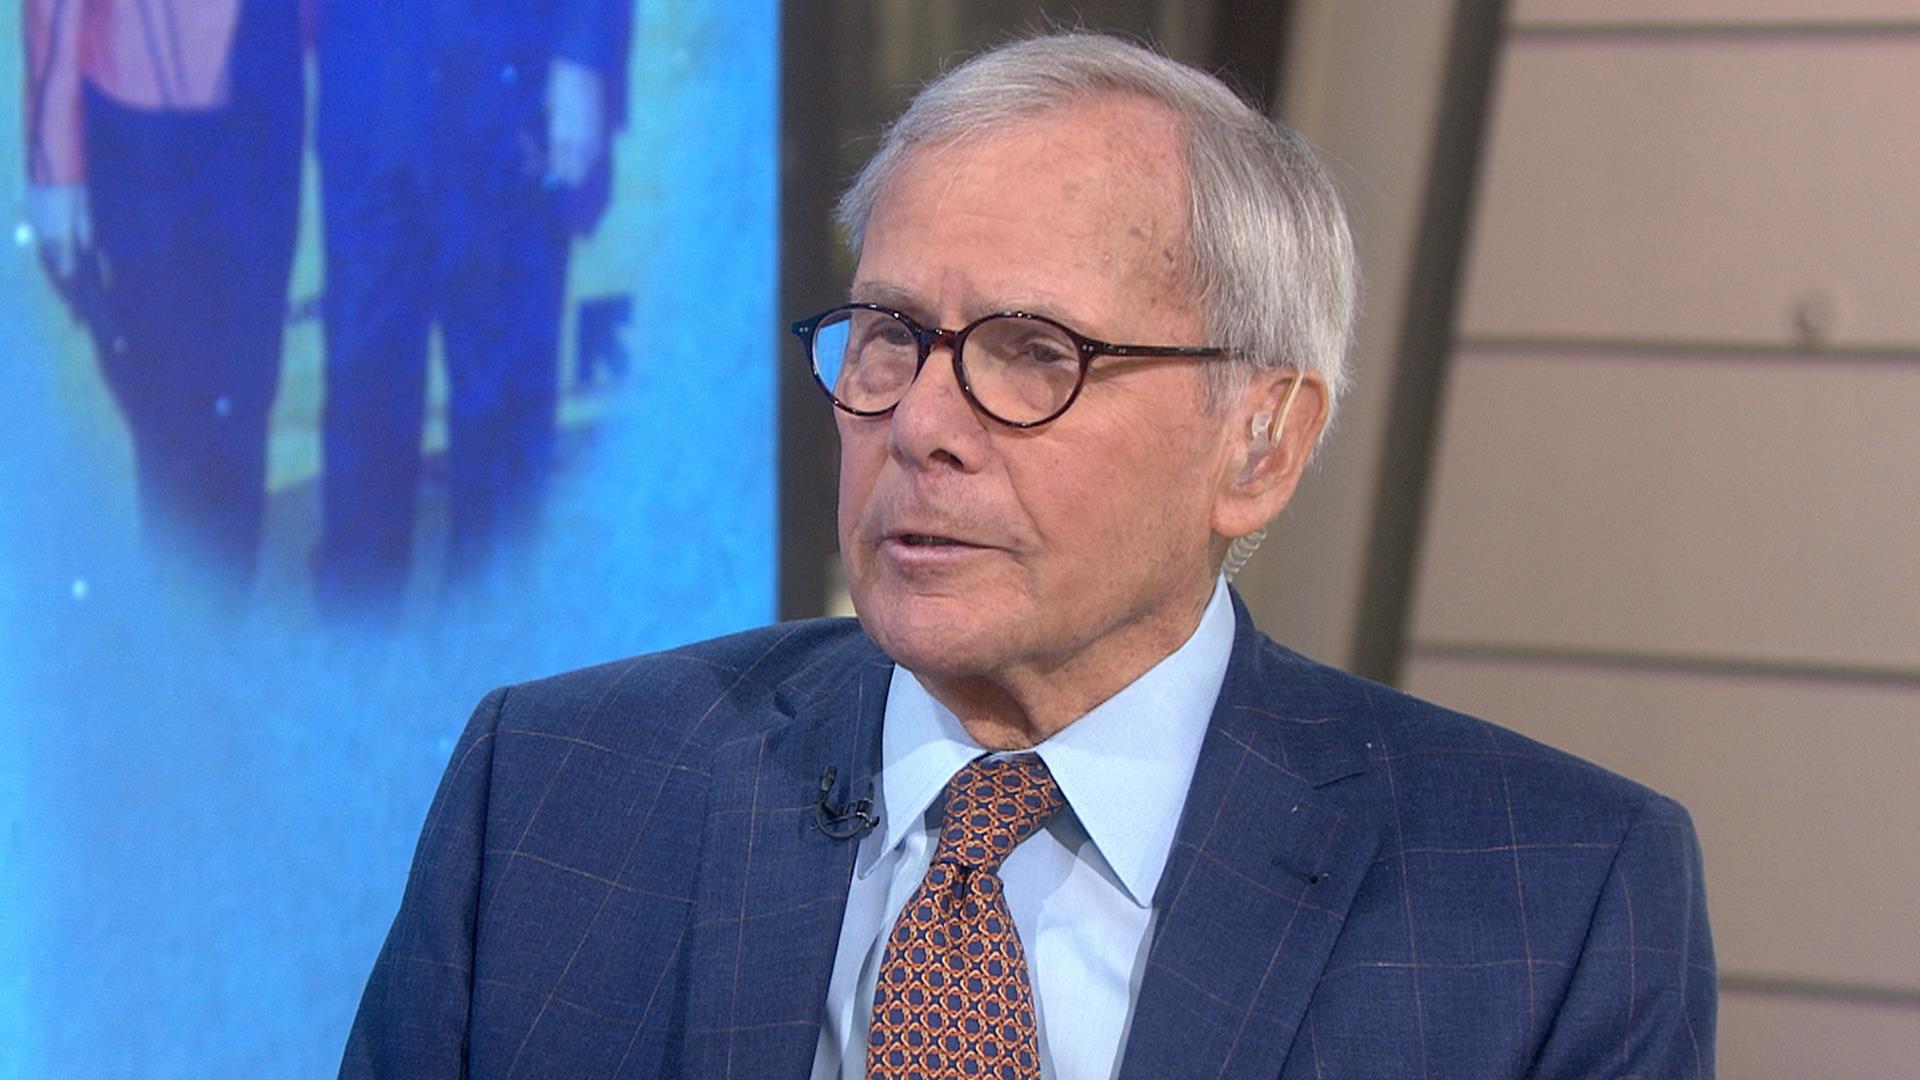 Tom Brokaw: My daughter has been 'invaluable' in my fight against cancer